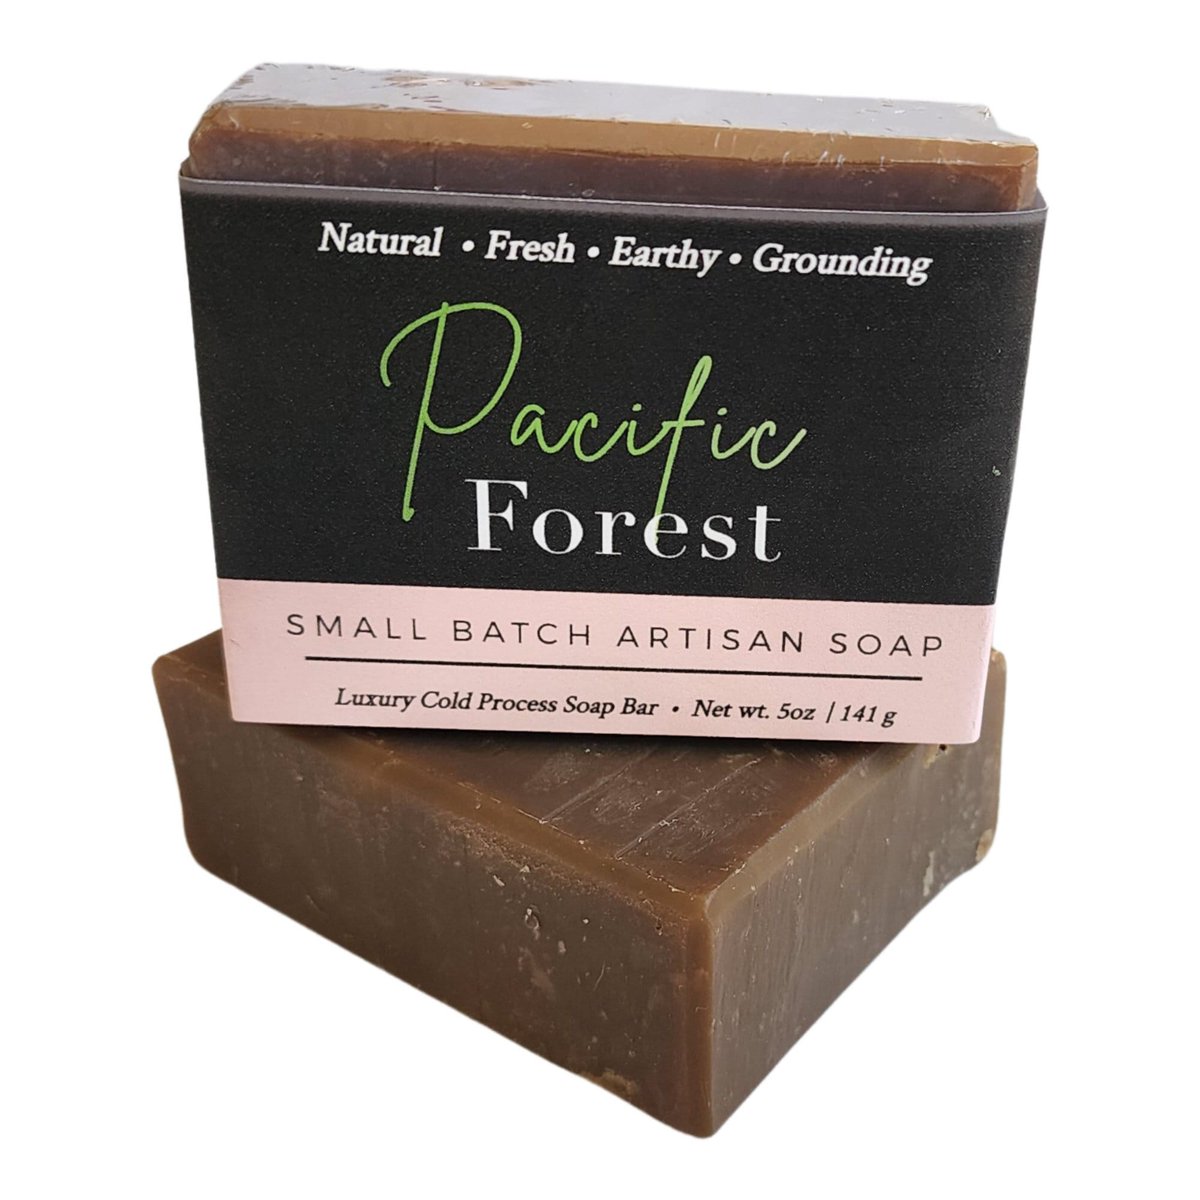 Pacific Forest Soap, Fir Needle Soap, Tree Scented Soap, Pine Scented Soap, Pine Tar Soap, Natural Soap, Vegan Soap, Soap Gift, Soap Samples tuppu.net/c8777d97 #Etsy #Christmasgifts #Soapgift #shopsmall #DeShawnMarie #PineScentedSoap